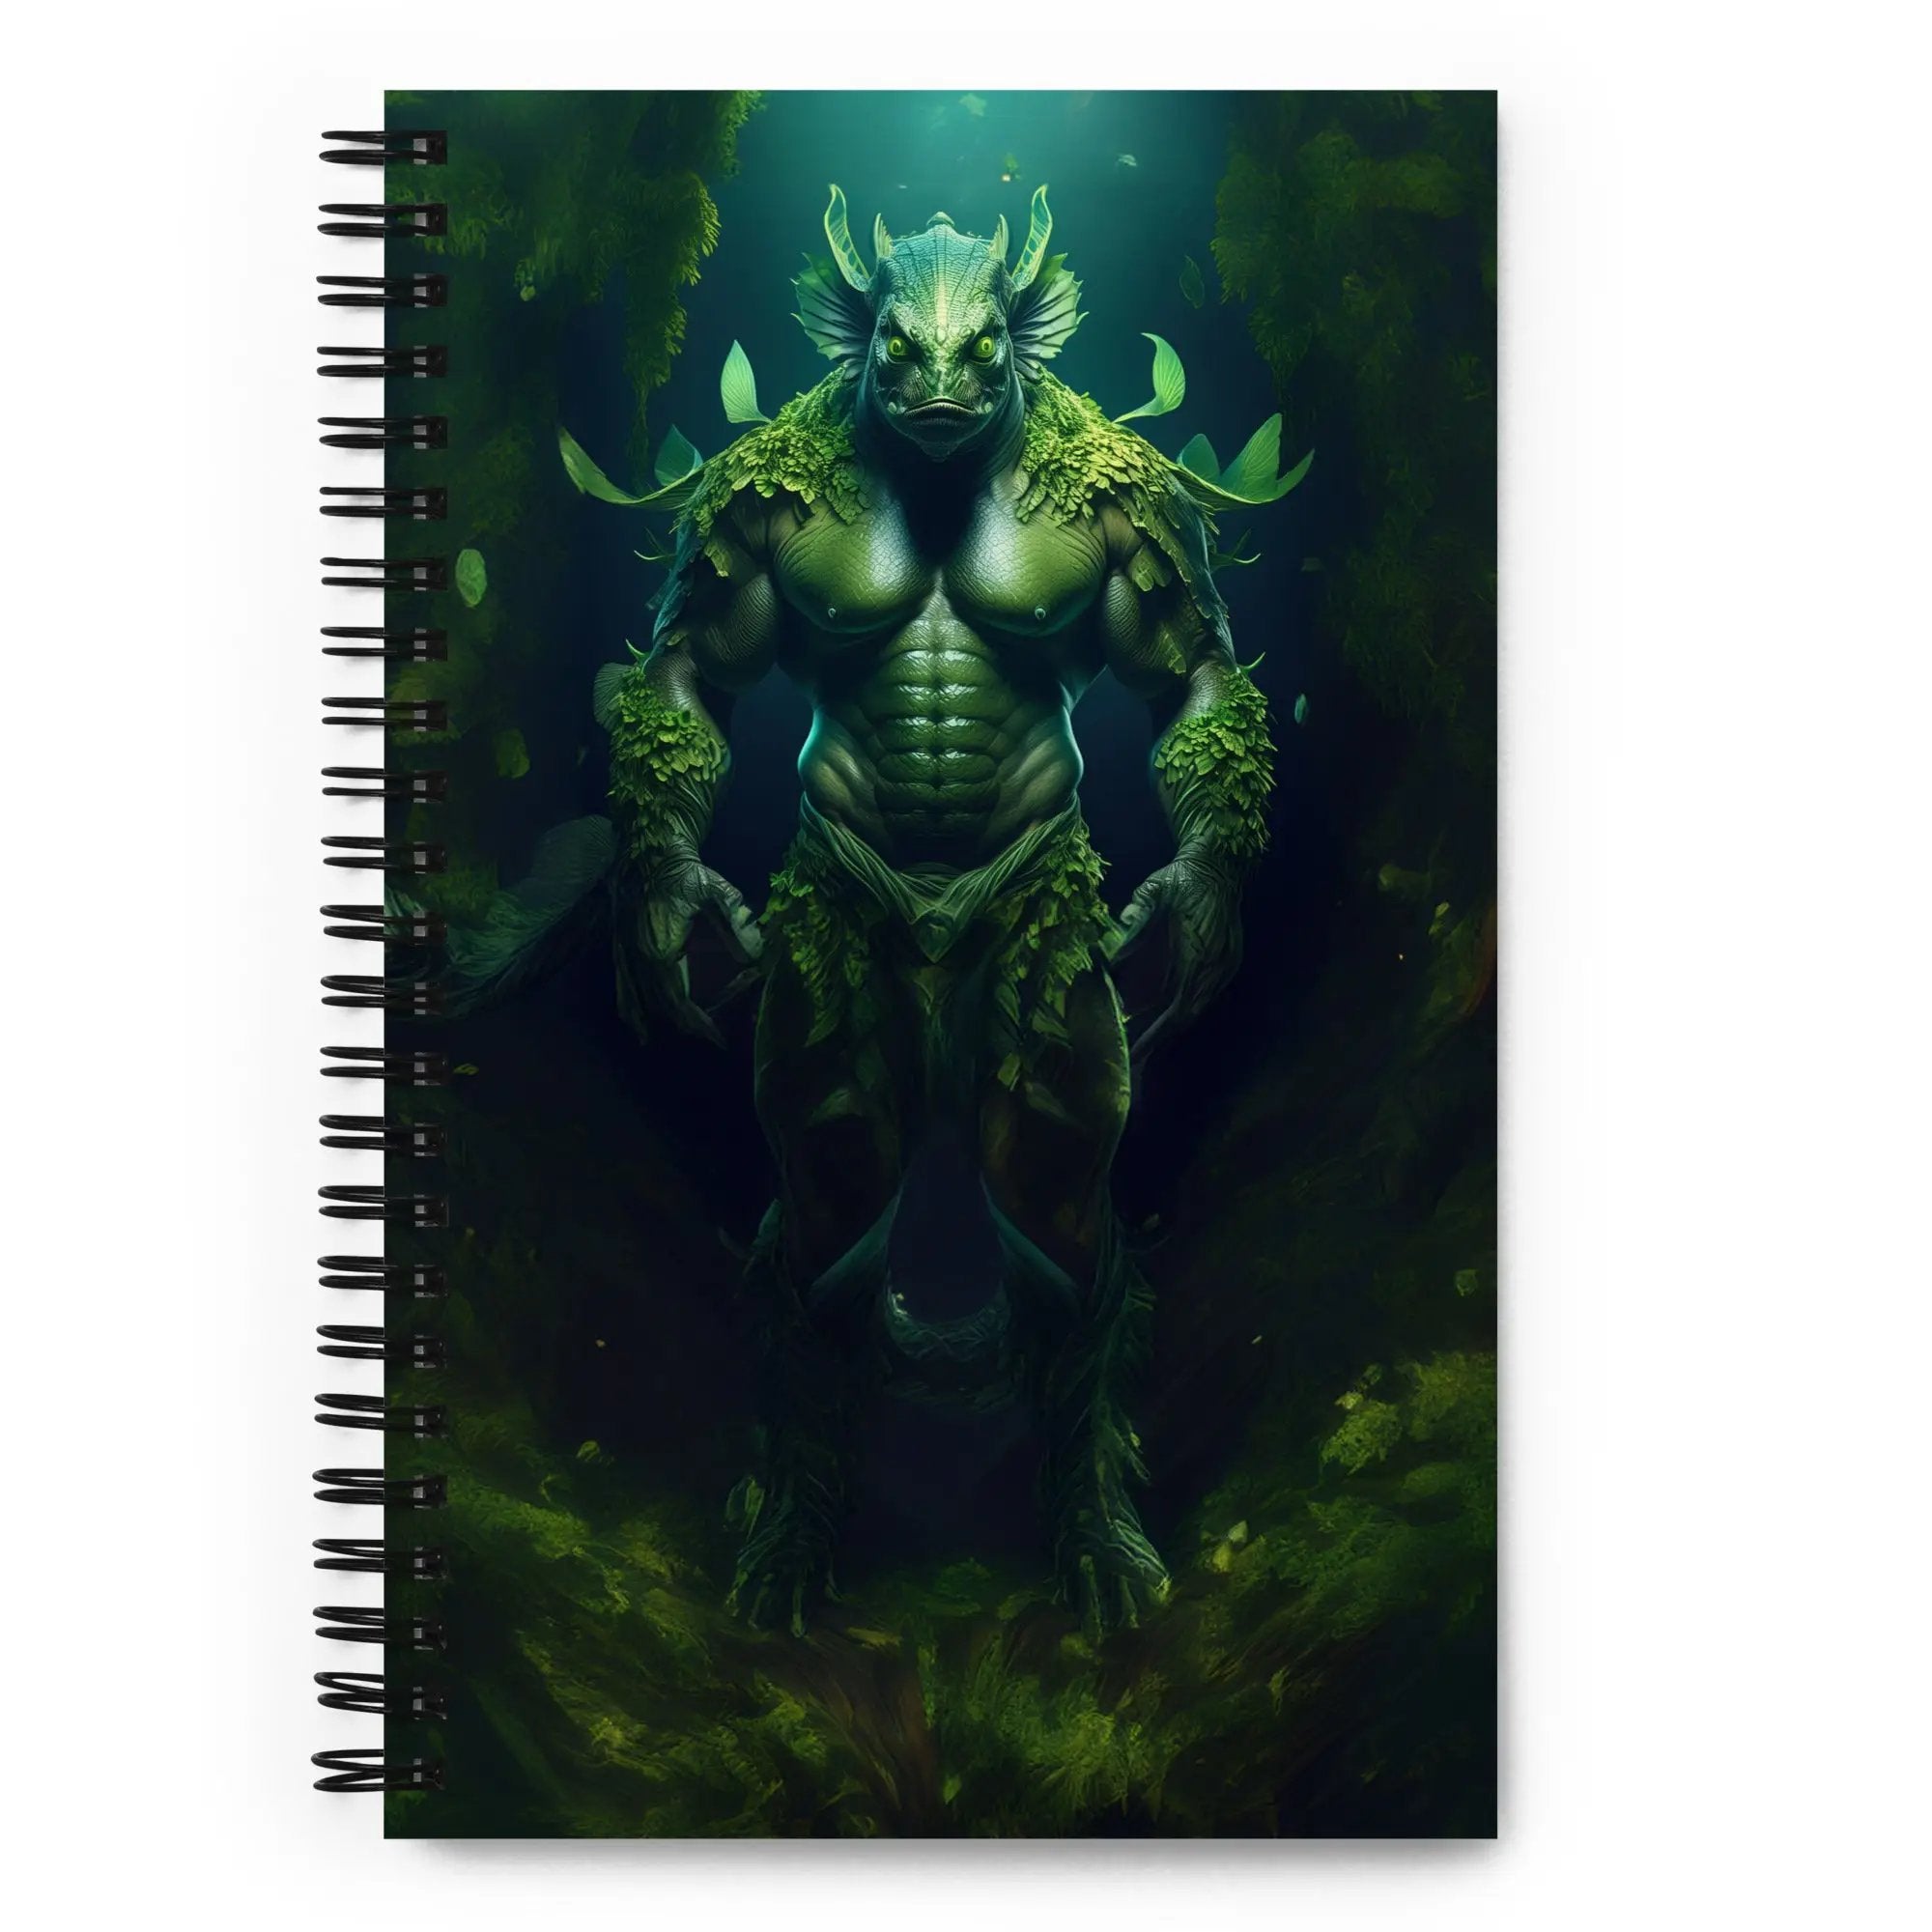 The Monster Squad "The Creature" Spiral Notebook